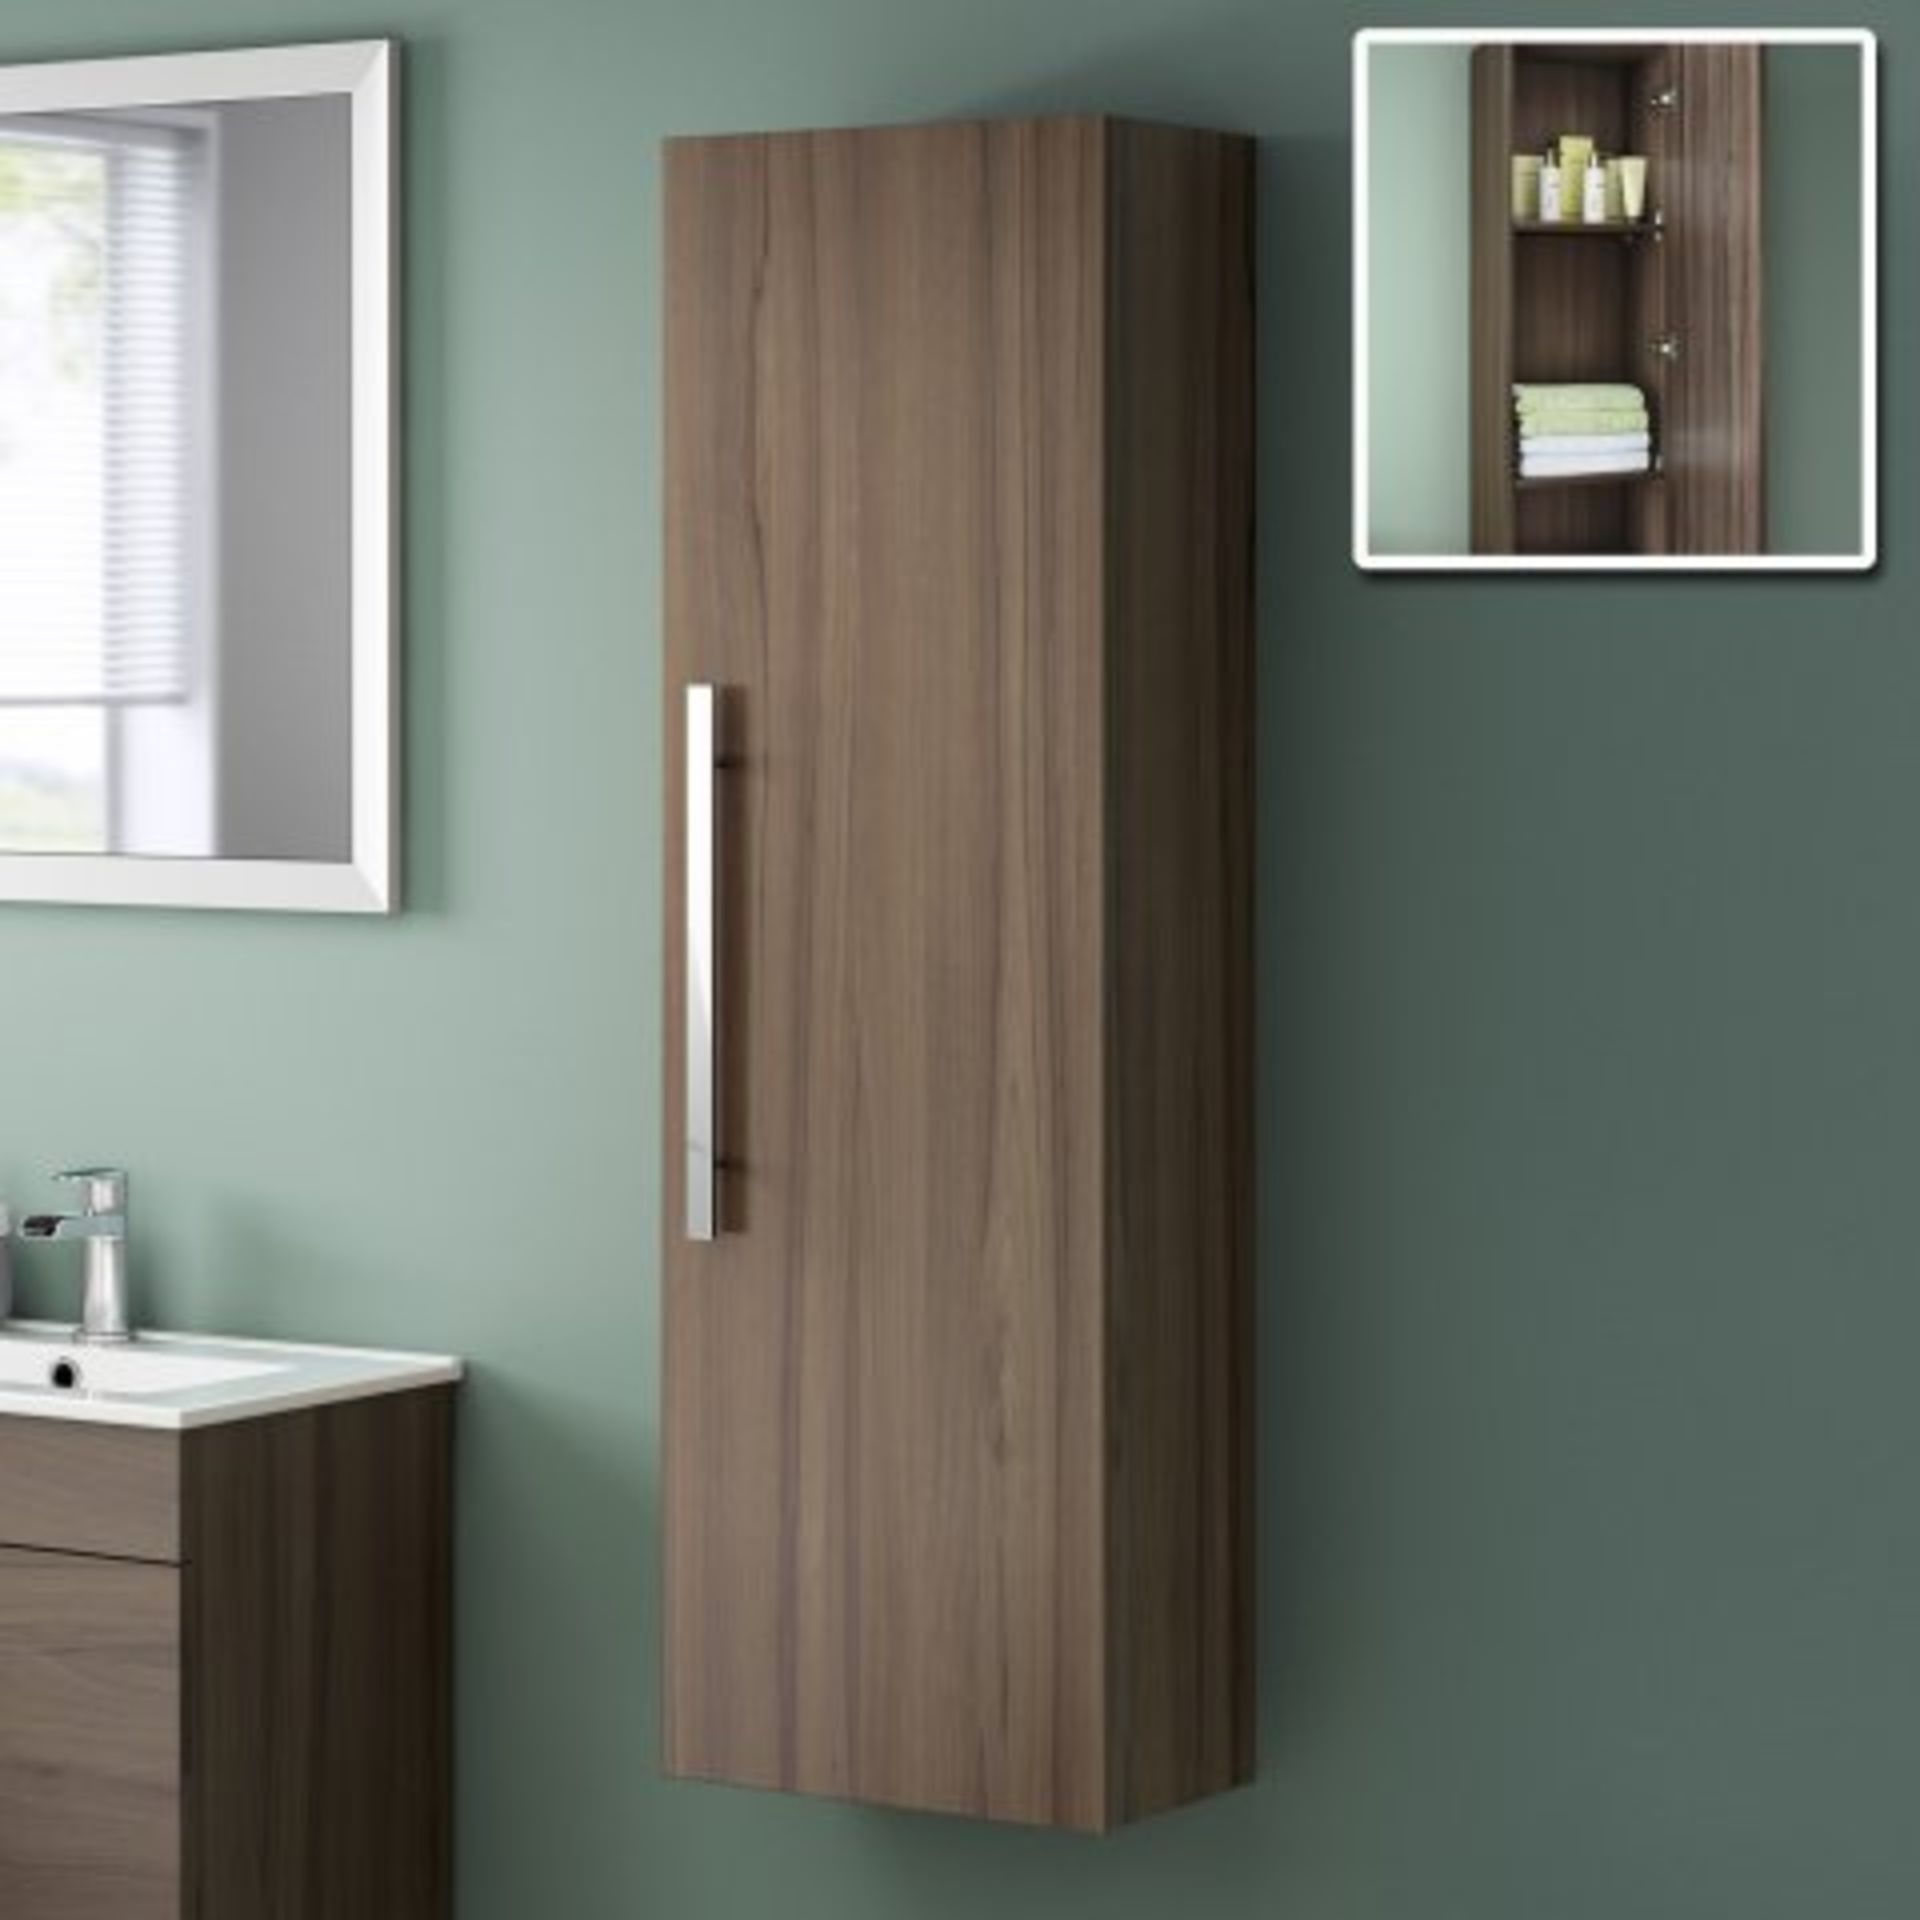 (A71) 1200mm Avon Walnut Effect Tall Storage Cabinet - Wall Hung RRP £274.99 If space saving is what